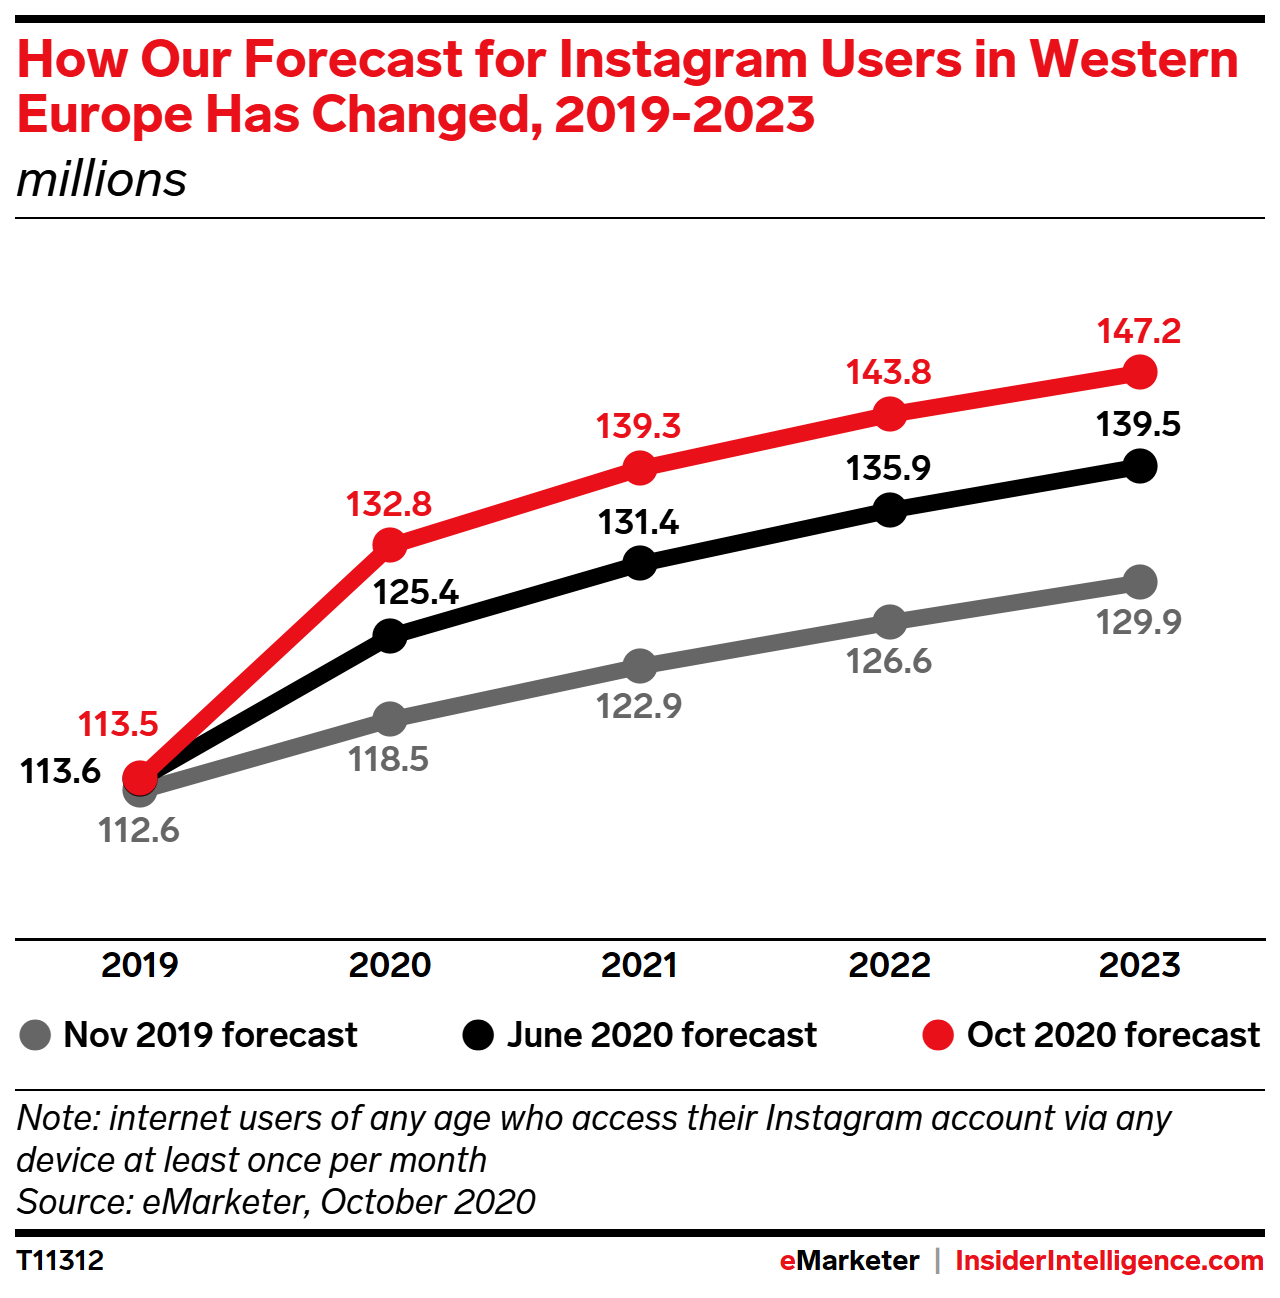 How Our Forecast for Instagram Users in Western Europe Has Changed, 2019-2023 (millions)